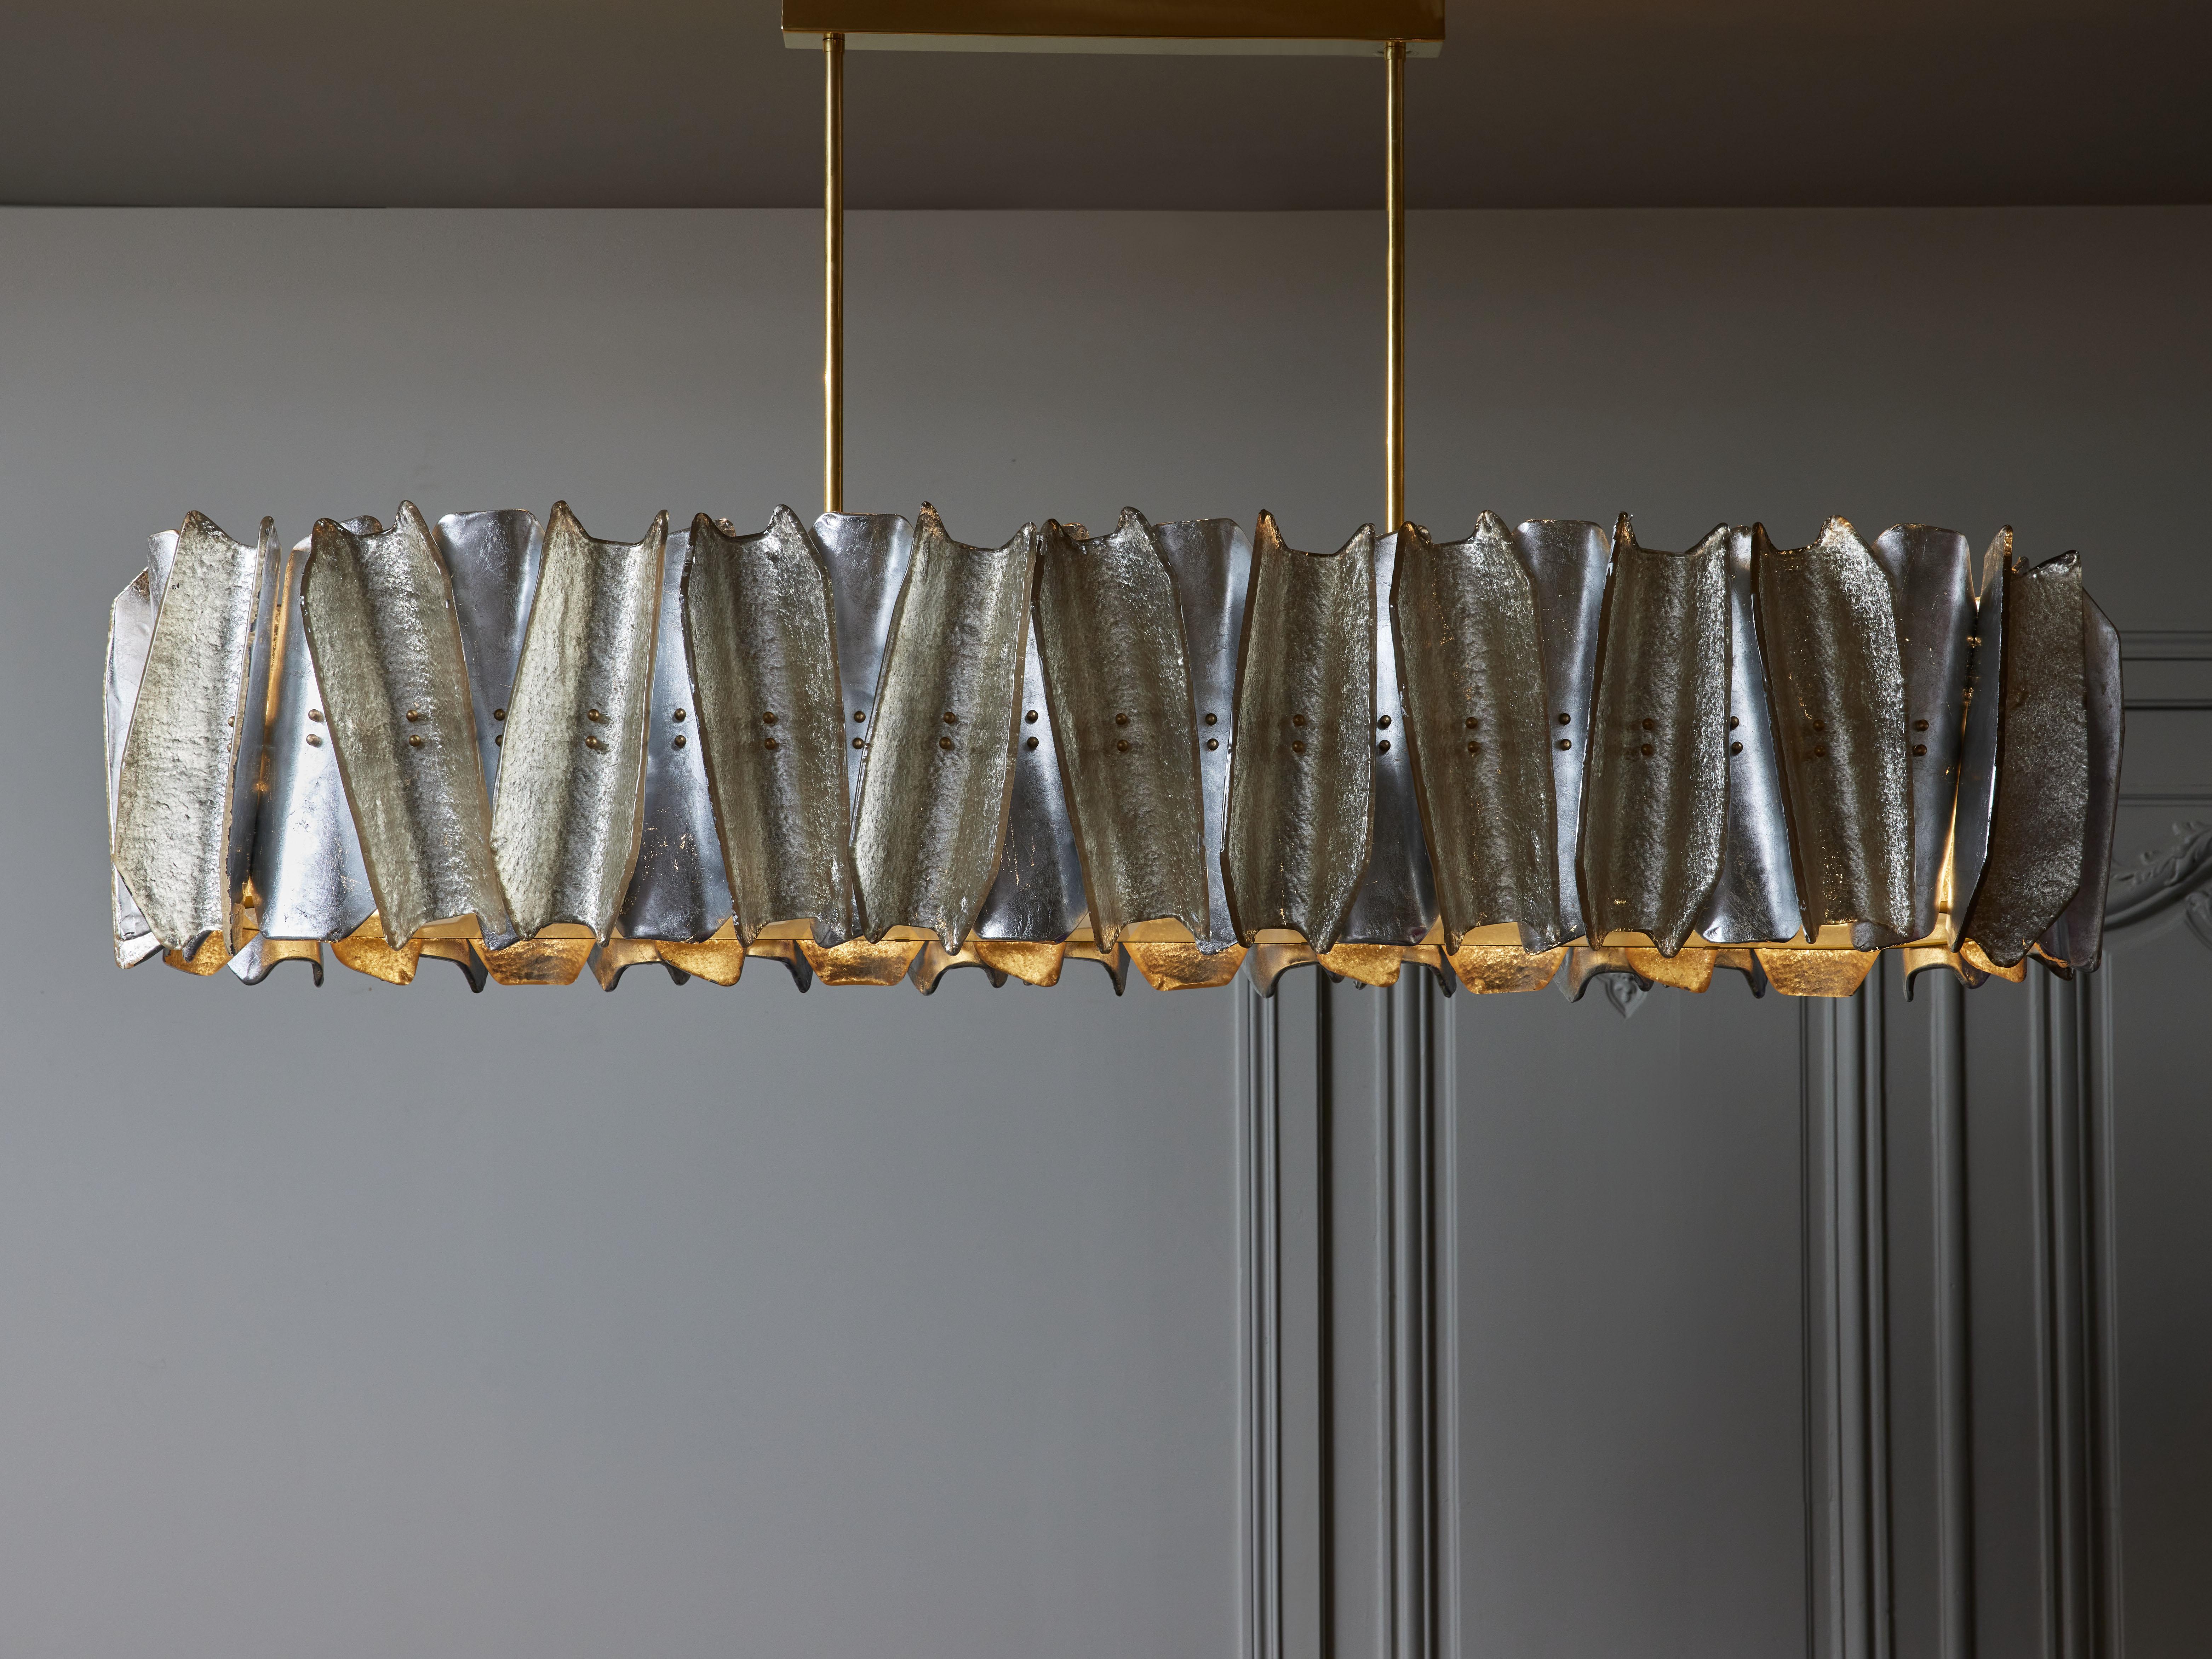 Elongated chandelier made of a brass structure, and Murano glass sheets bent and twisted, colored in silver and champagne. A large frosted glass plate covering the bottom of the chandelier and help to diffuse the light.